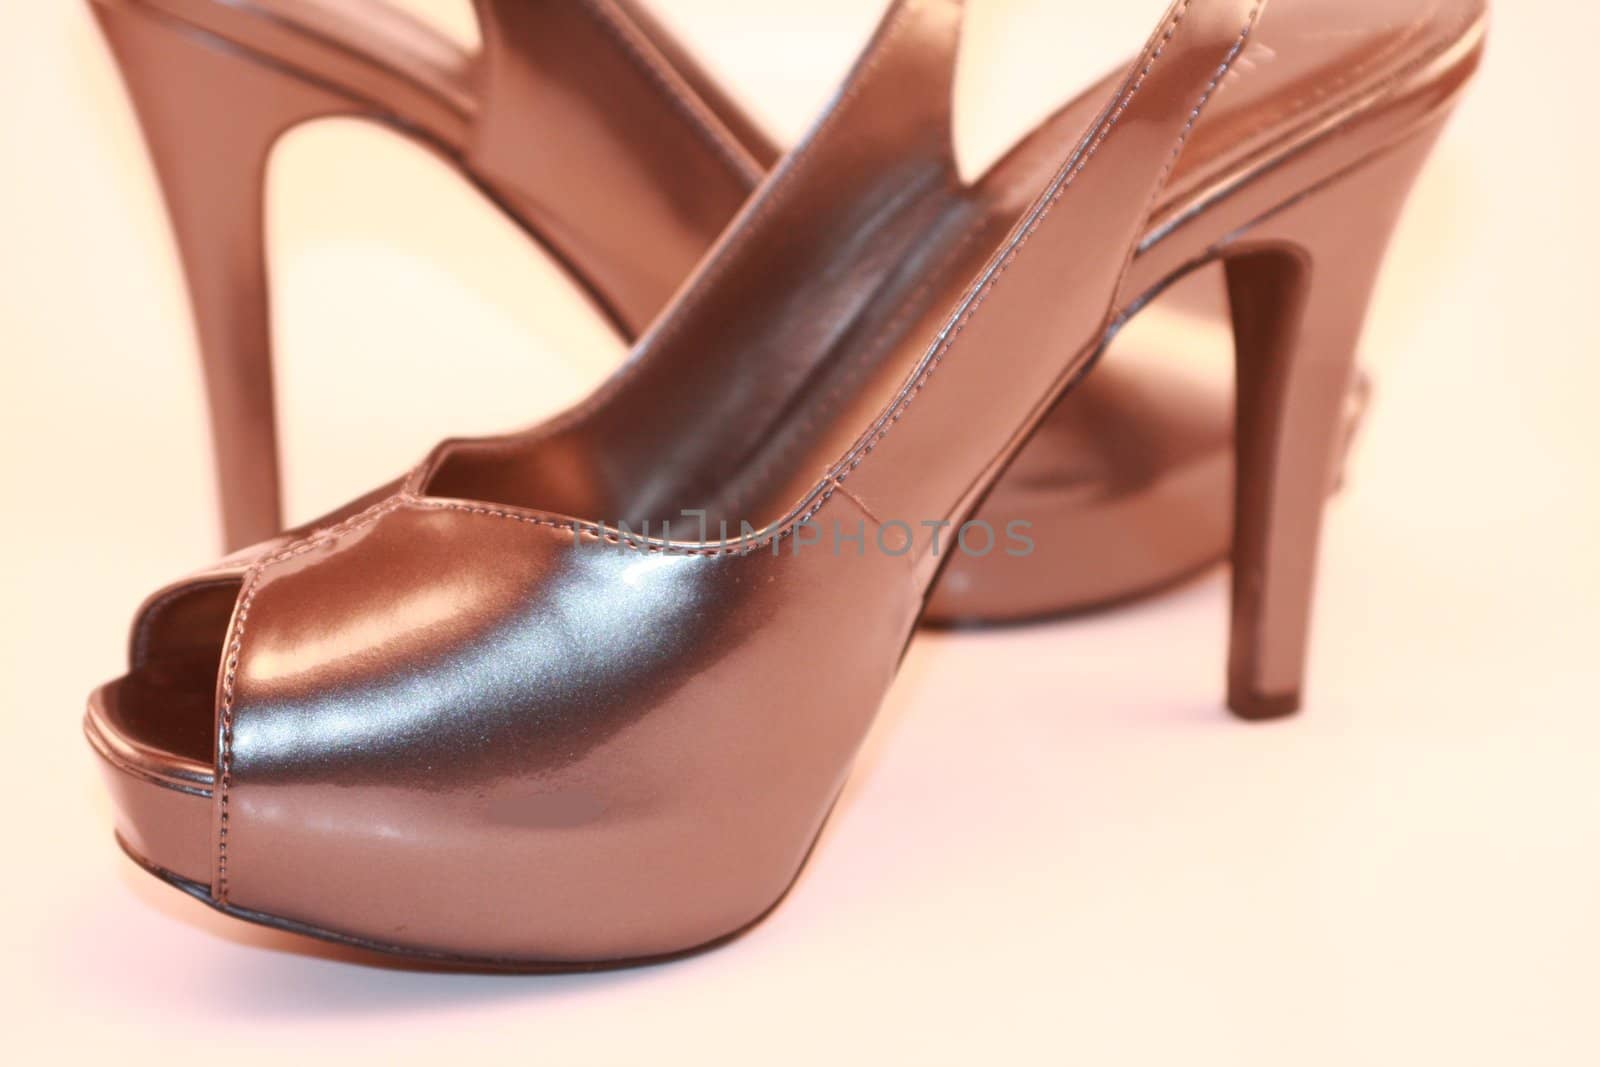 Women's high heel silver shoes. Sexy shoes for fashion, holiday and special occasion. Attractive women's shoes.